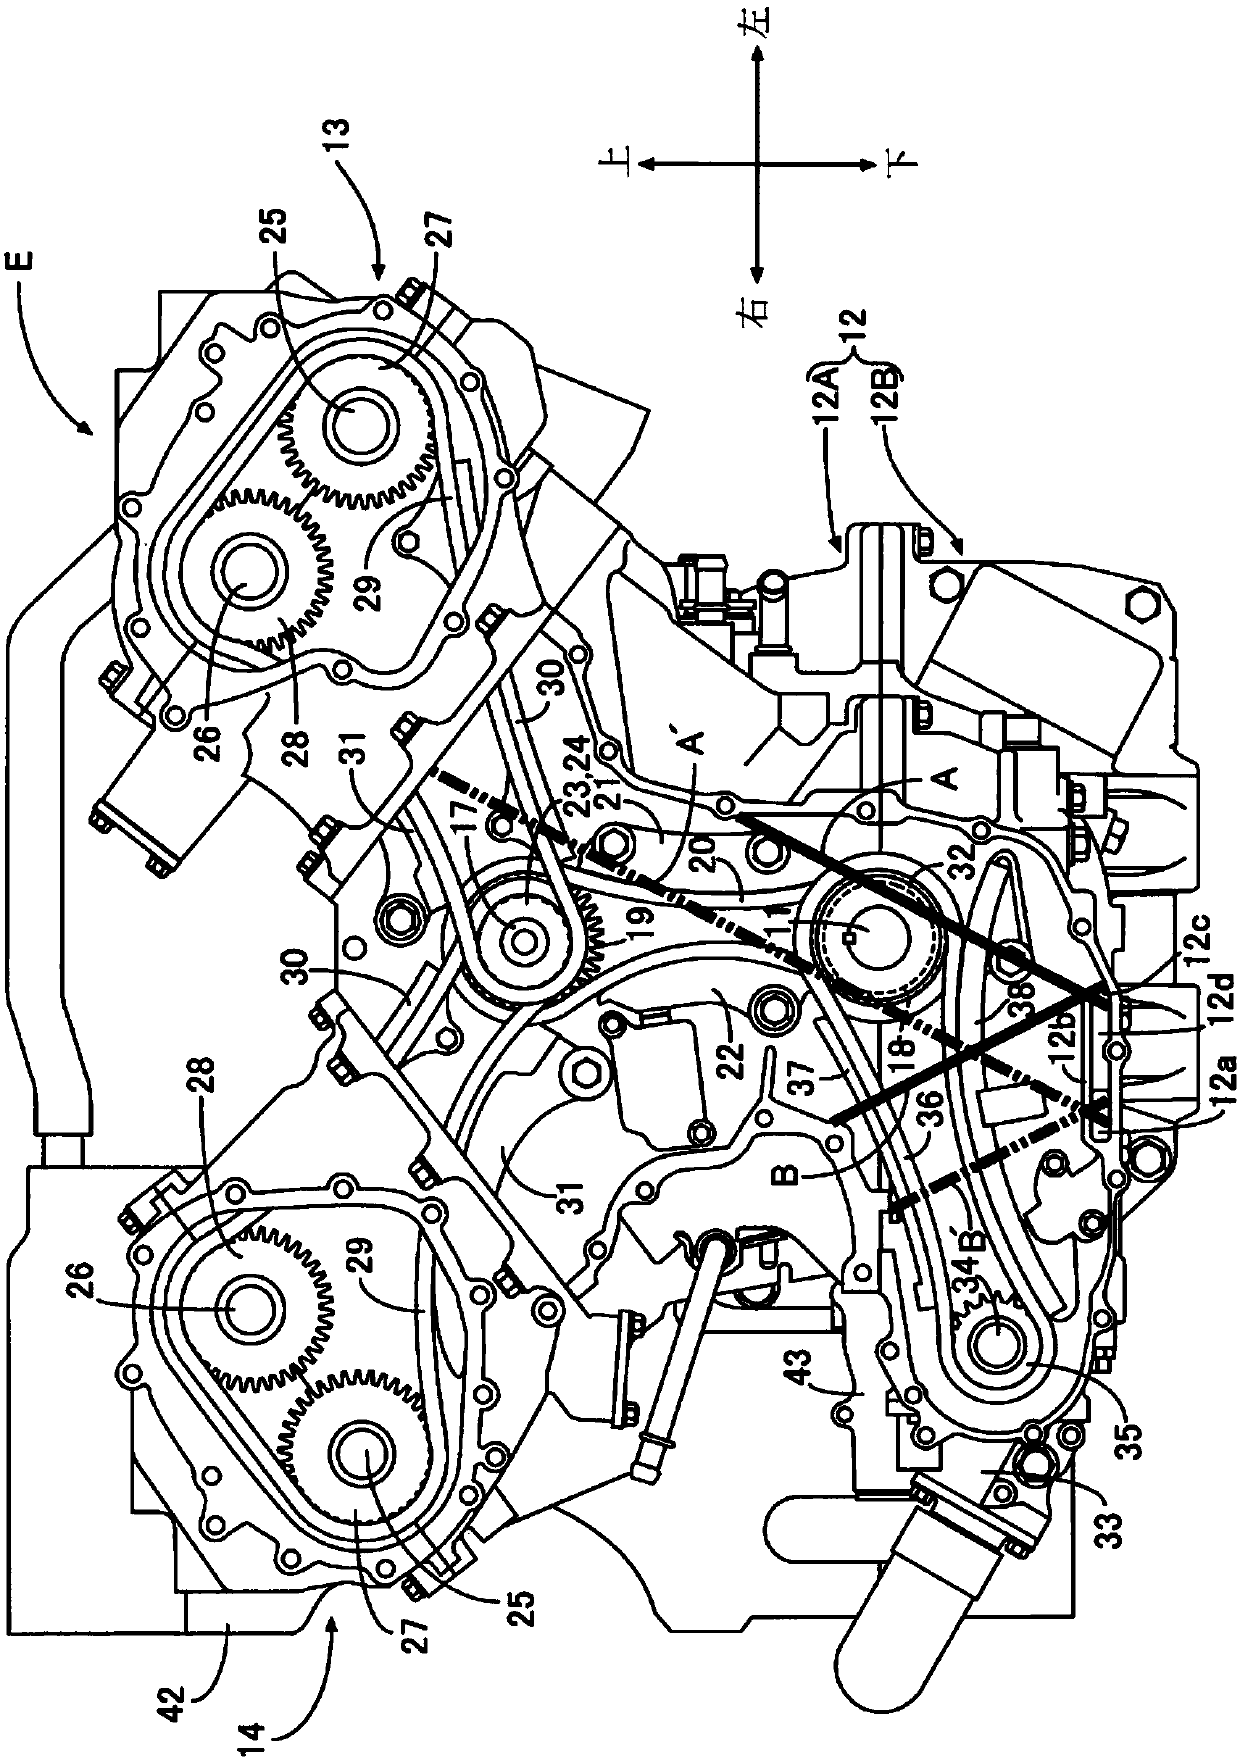 Cover parts for internal combustion engines